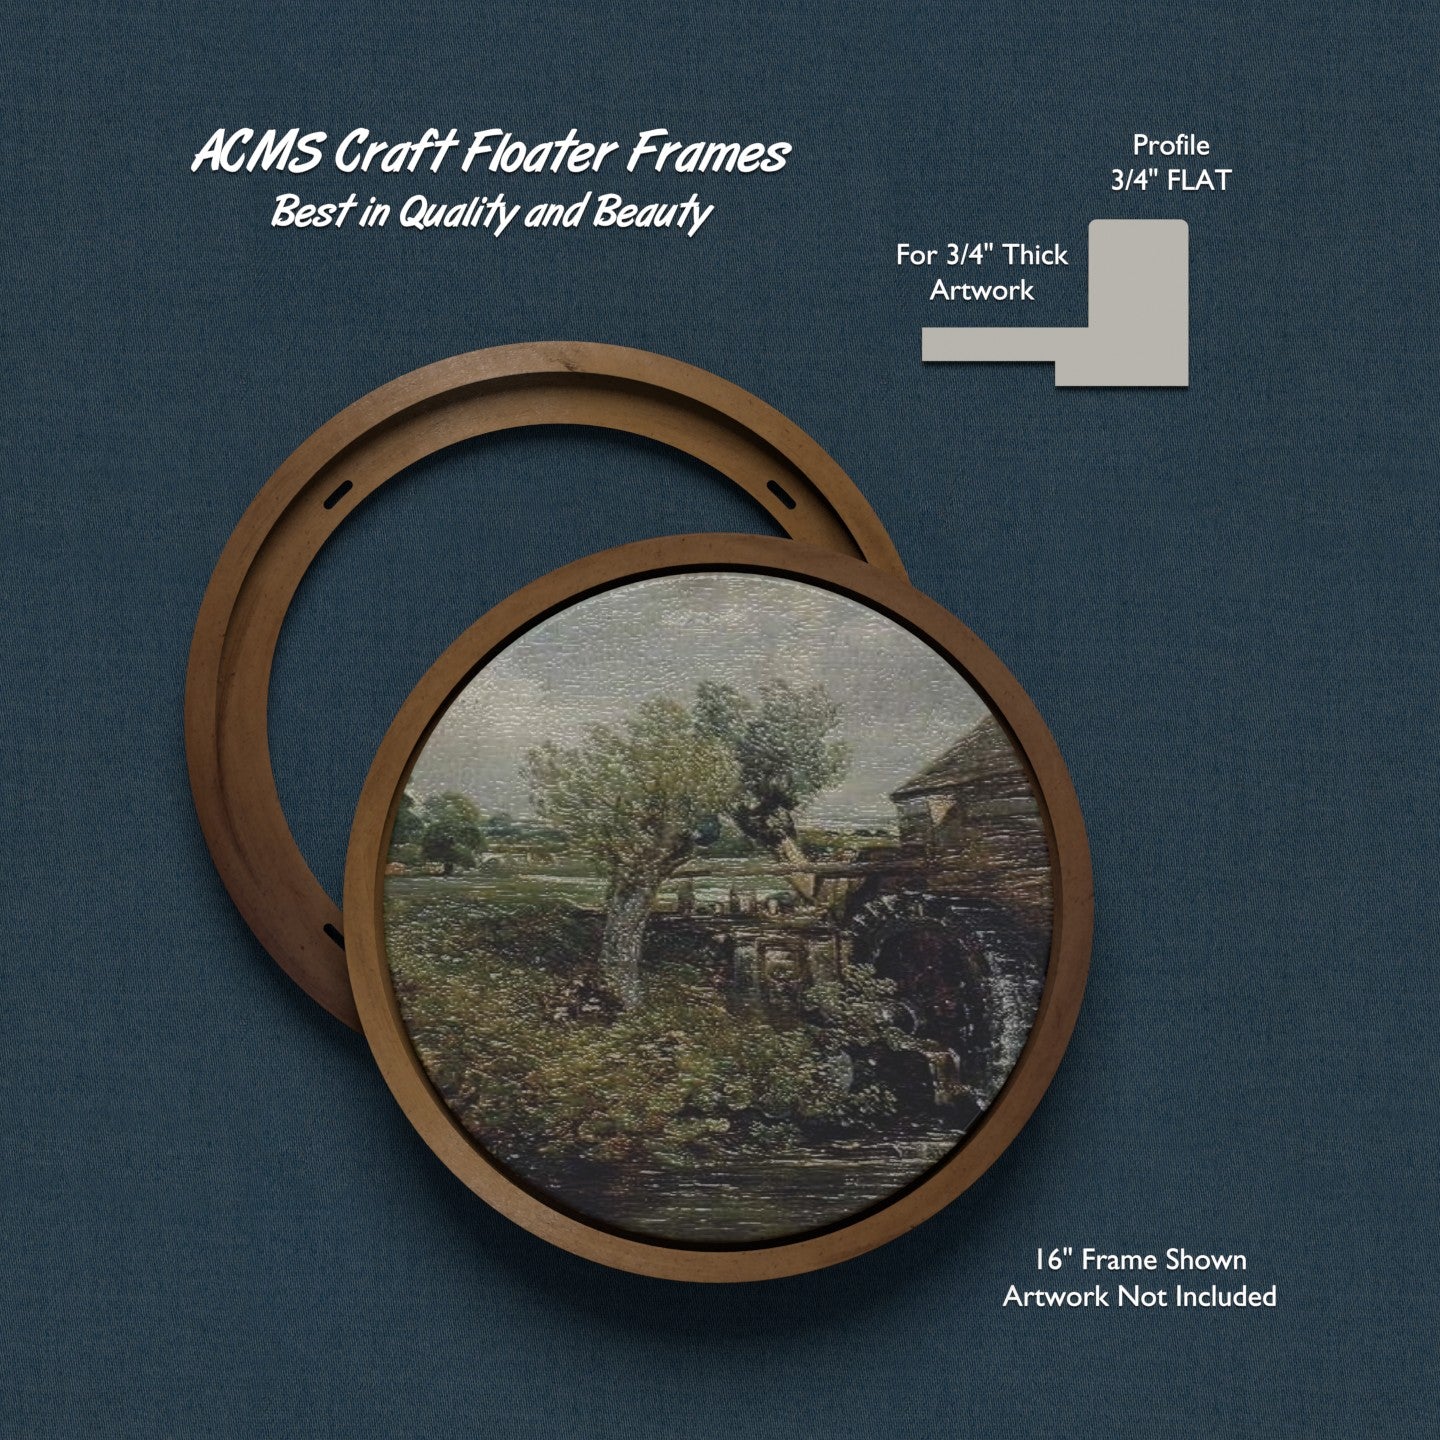 ACMS Round Craft Floater Frame - For 3/4" Thick Artwork - Profile 3/4" FLAT - 1 1/4" Thick Frame